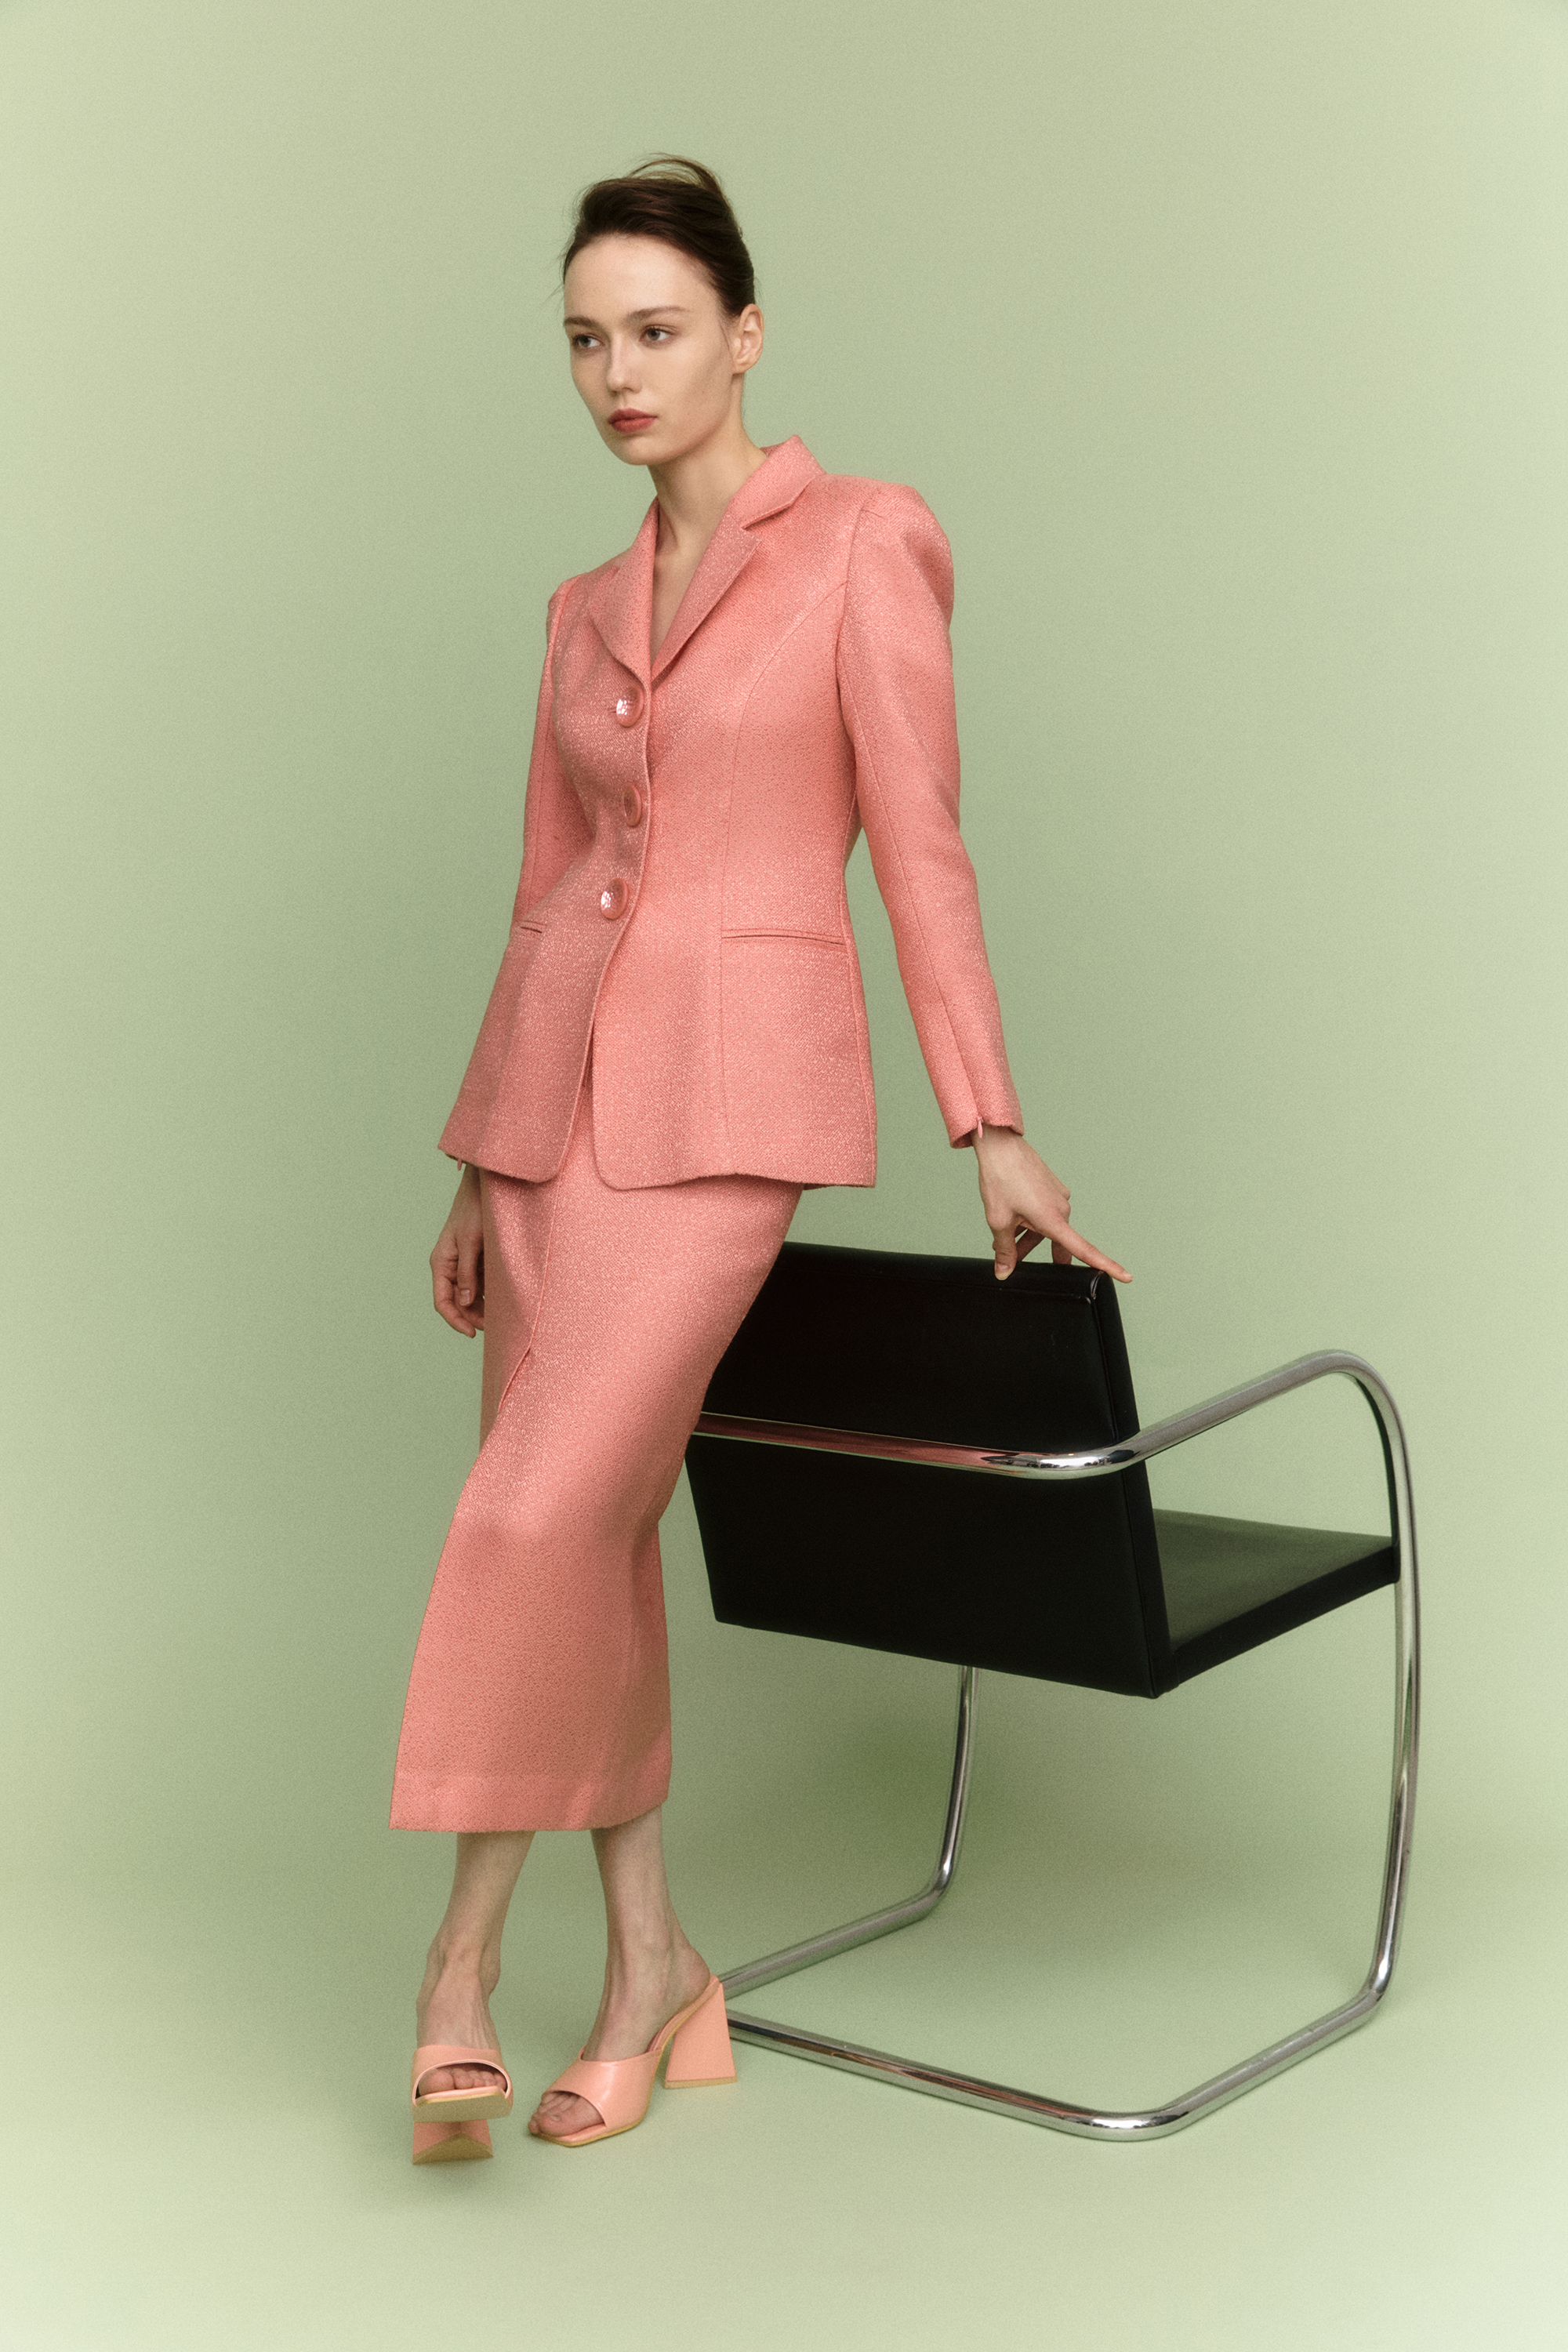 Agency Pink Suit